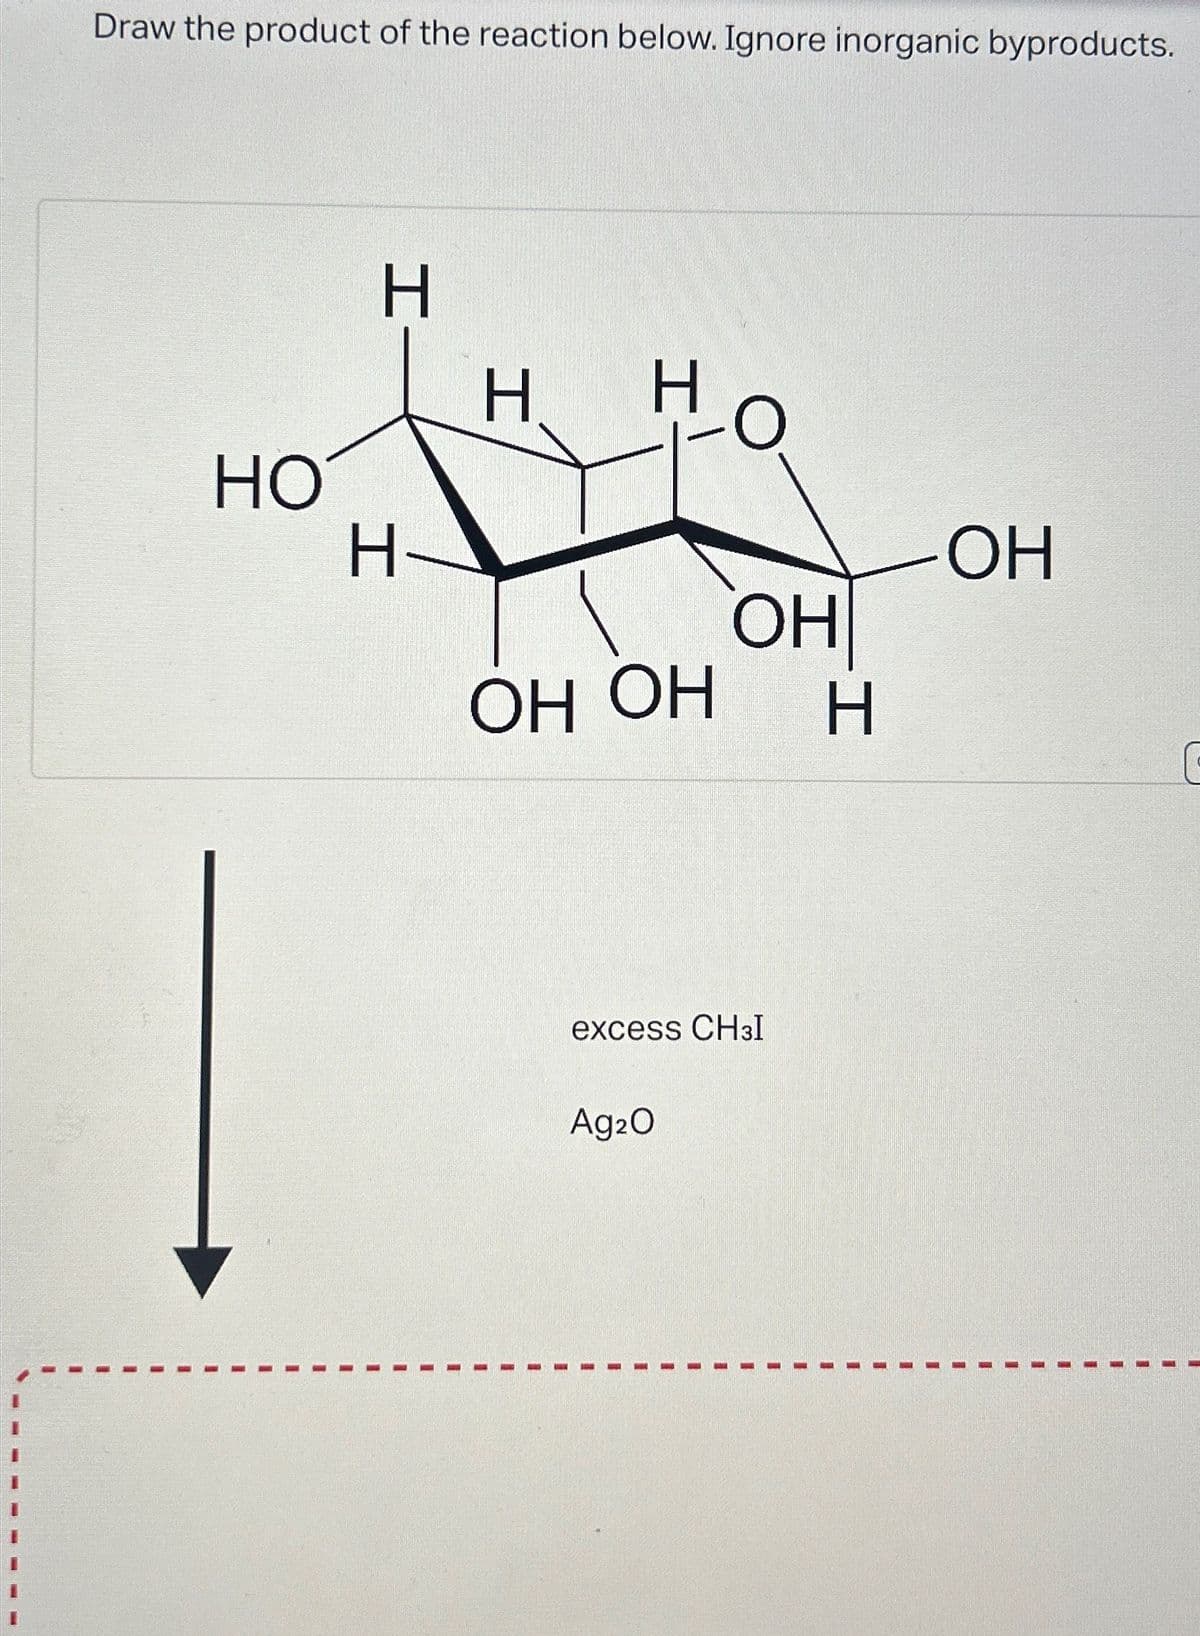 Draw the product of the reaction below. Ignore inorganic byproducts.
HO
H
H
HO
H-
OH
OH
OH OH
H
excess CHзI
Ag2O